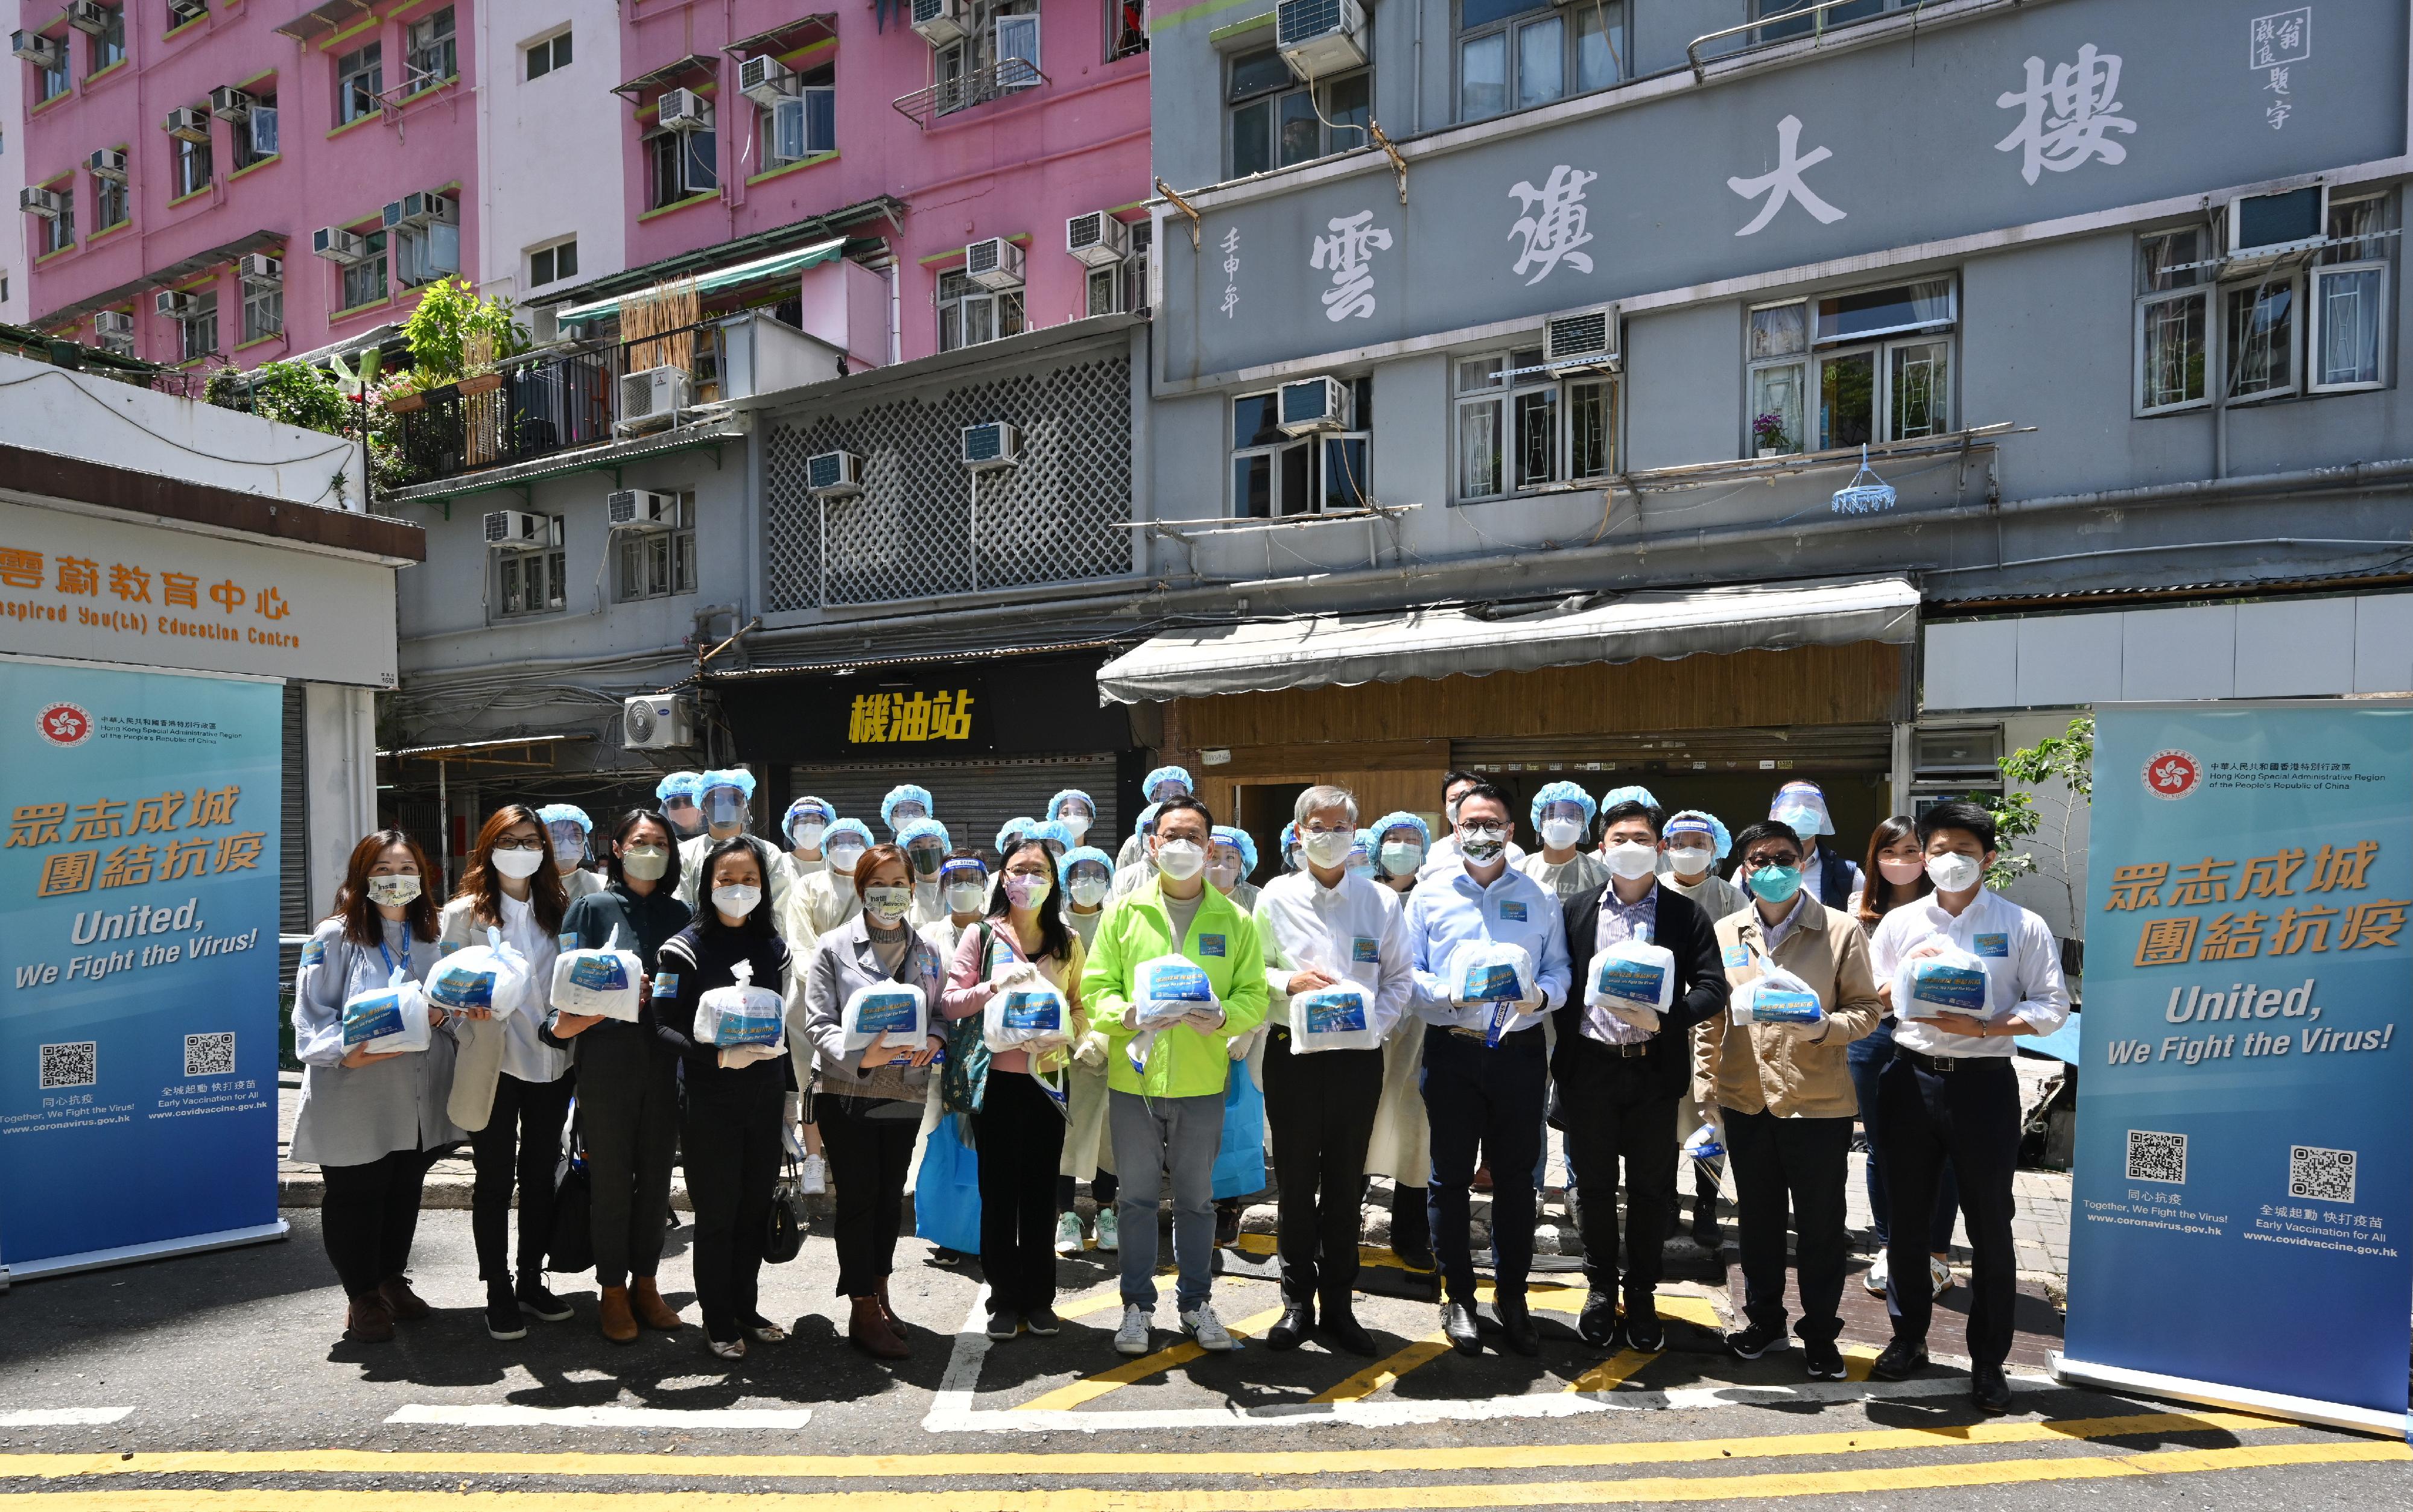 The Secretary for Labour and Welfare, Dr Law Chi-kwong, and the Permanent Secretary for Labour and Welfare, Ms Alice Lau, today (April 4) led their team to distribute anti-epidemic service bags to households in an old building in Kwun Tong District. Photo shows (front row, from second right) the Director of Kowloon Federation of Associations Kwun Tong District Committee, Mr Wong Chun-ping; the Principal Assistant Secretary for Labour and Welfare (Welfare), Mr Tony Yip; the District Officer (Kwun Tong), Mr Steve Tse; Dr Law; the Chairman of Kwun Tong District Council, Mr Wilson Or; Ms Lau; the Director of Hong Kong Christian Service, Ms Yvonne Chak; and the District Social Welfare Officer (Kwun Tong), Miss Rebecca Koo, with the team from the Labour and Welfare Bureau.